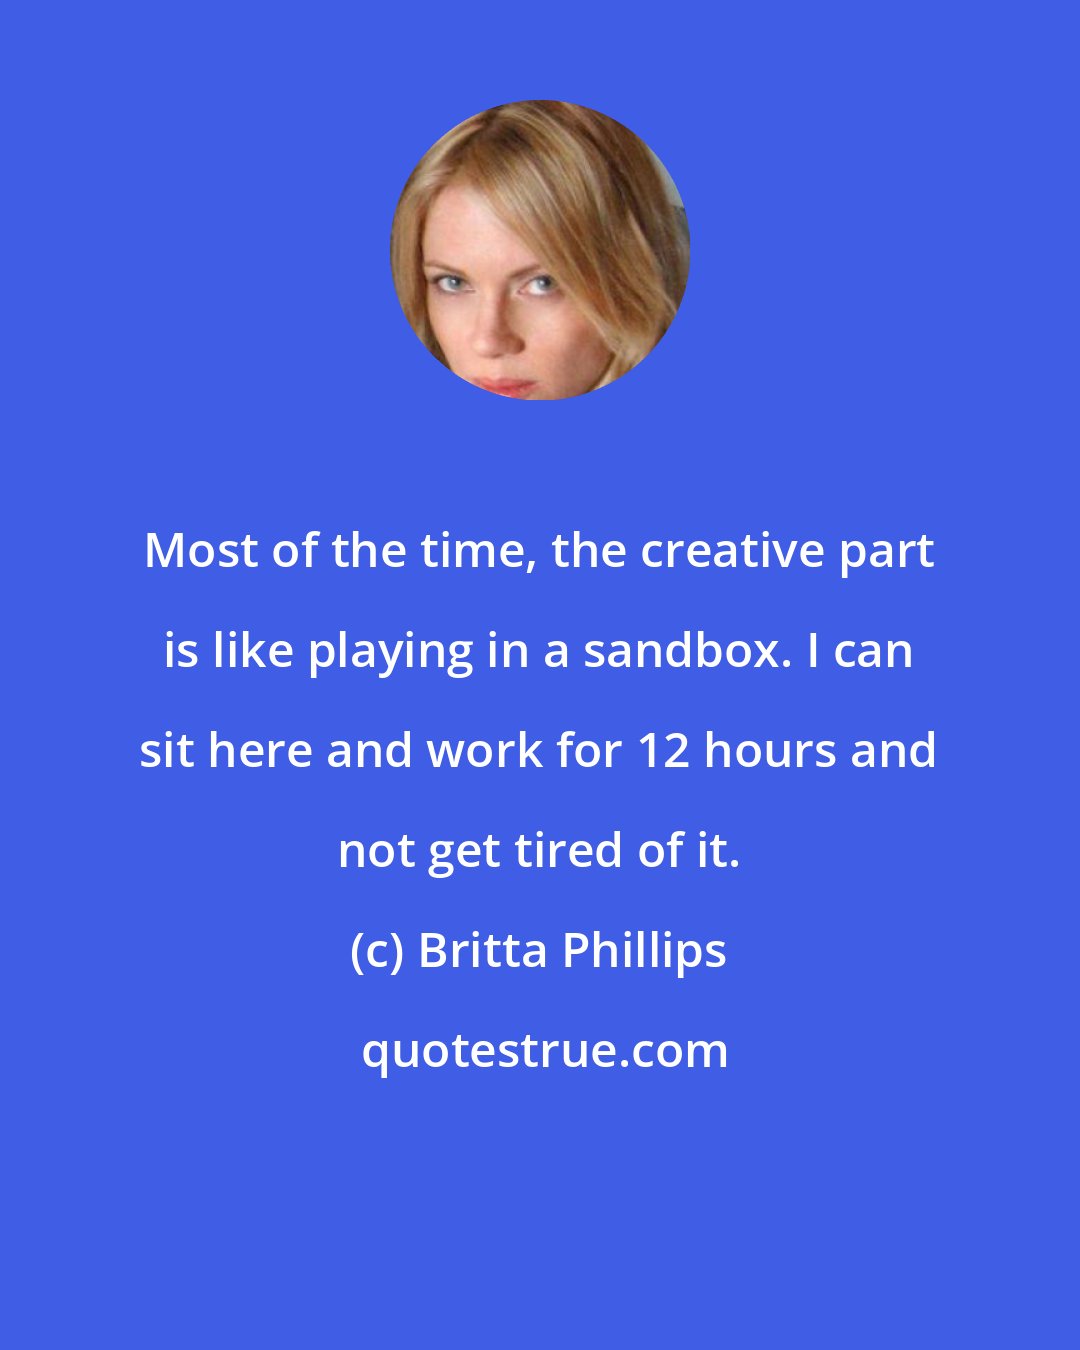 Britta Phillips: Most of the time, the creative part is like playing in a sandbox. I can sit here and work for 12 hours and not get tired of it.